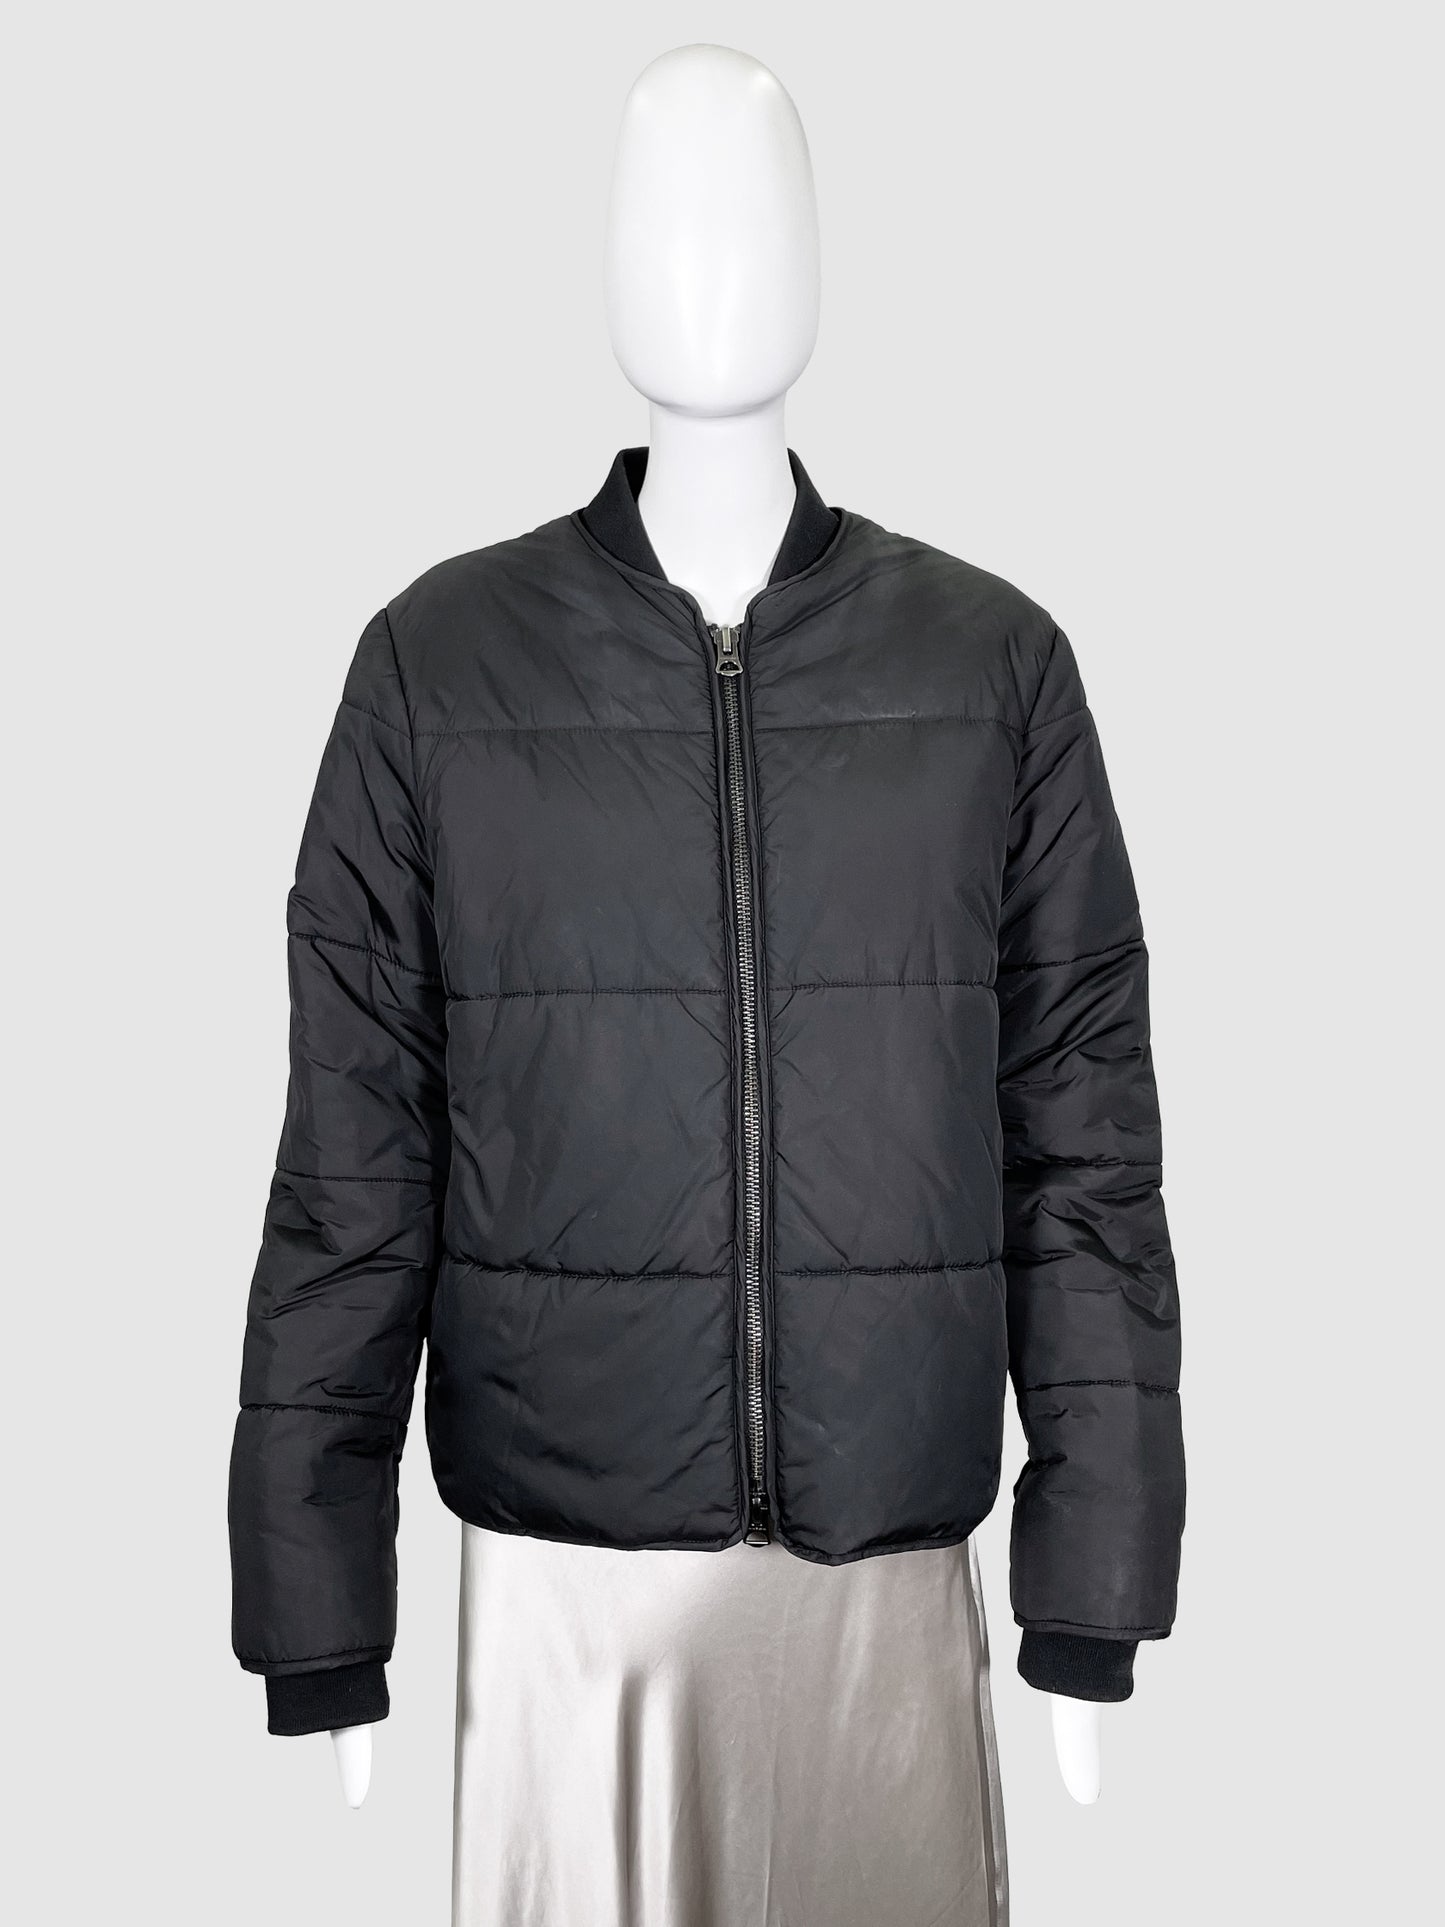 Acne Studios Quilted Bomber Jacket - Size M